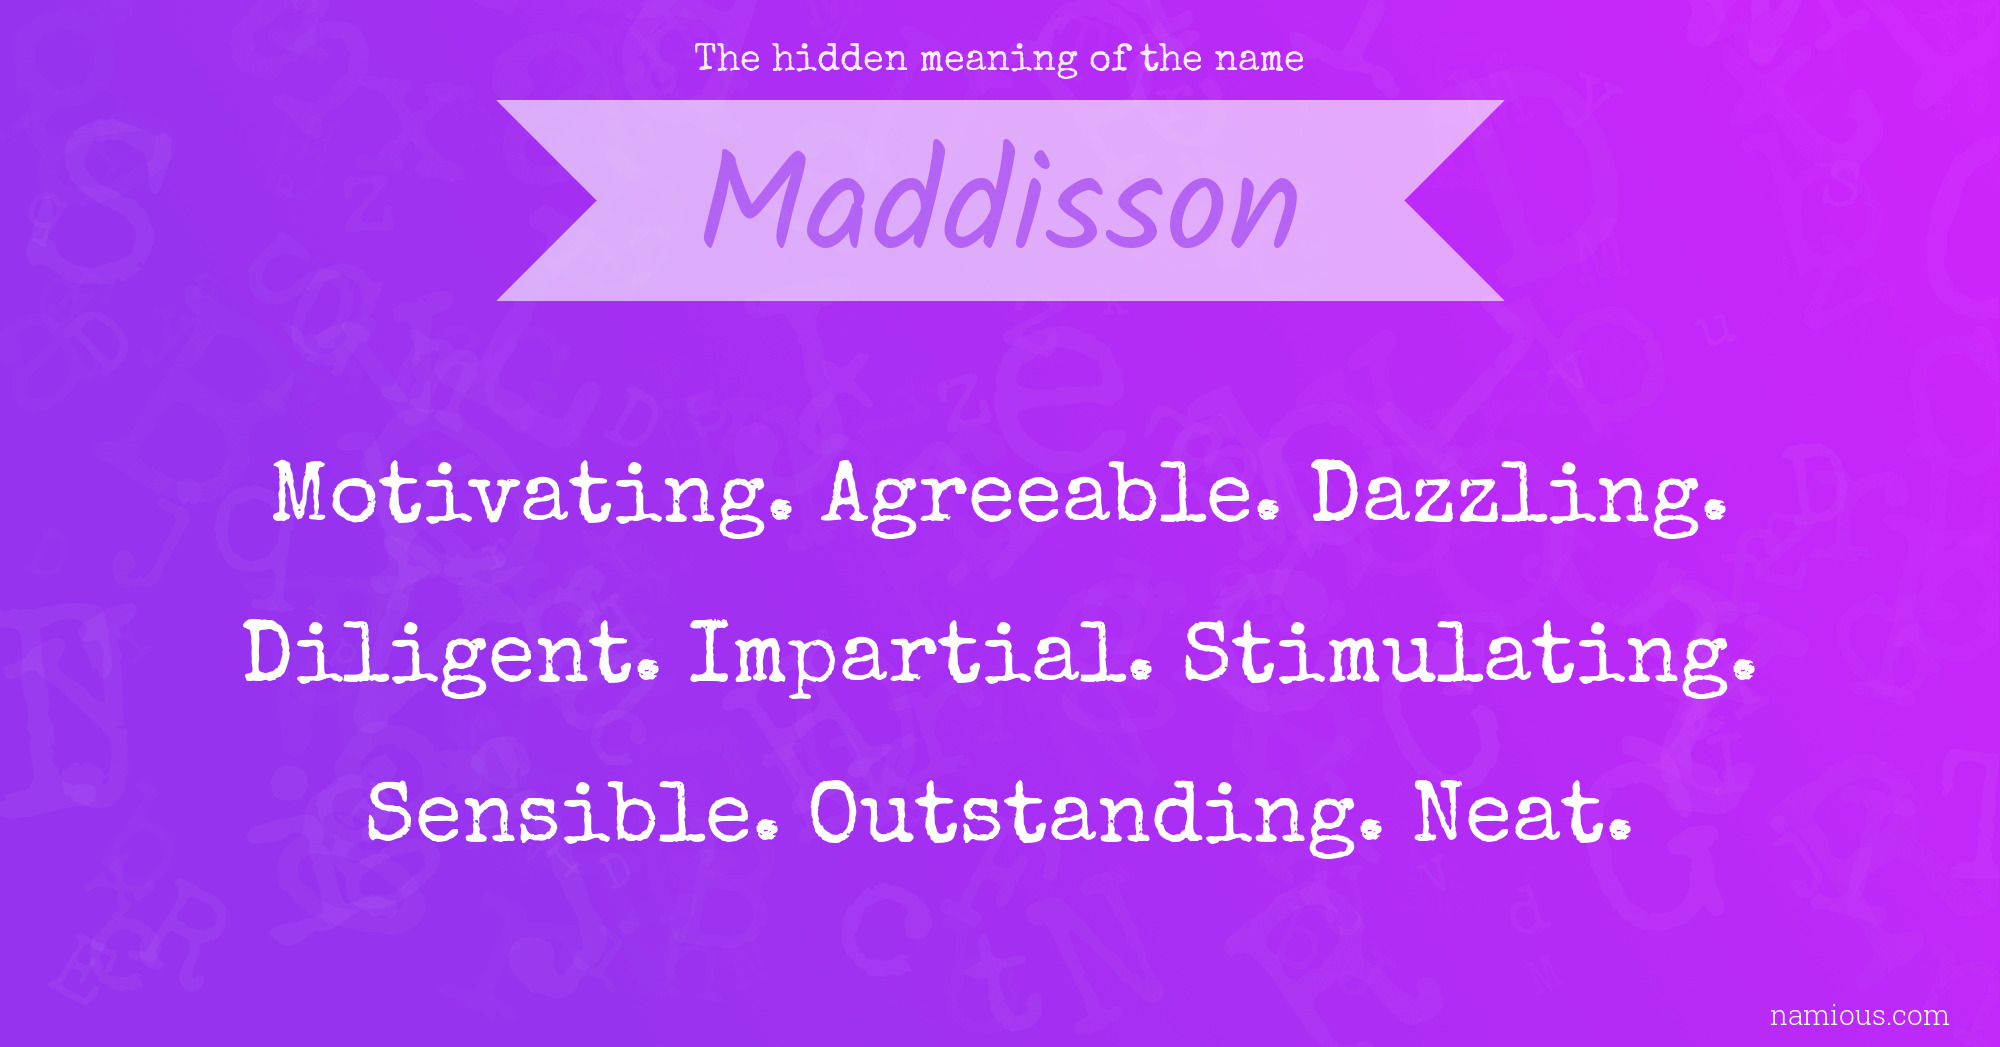 The hidden meaning of the name Maddisson